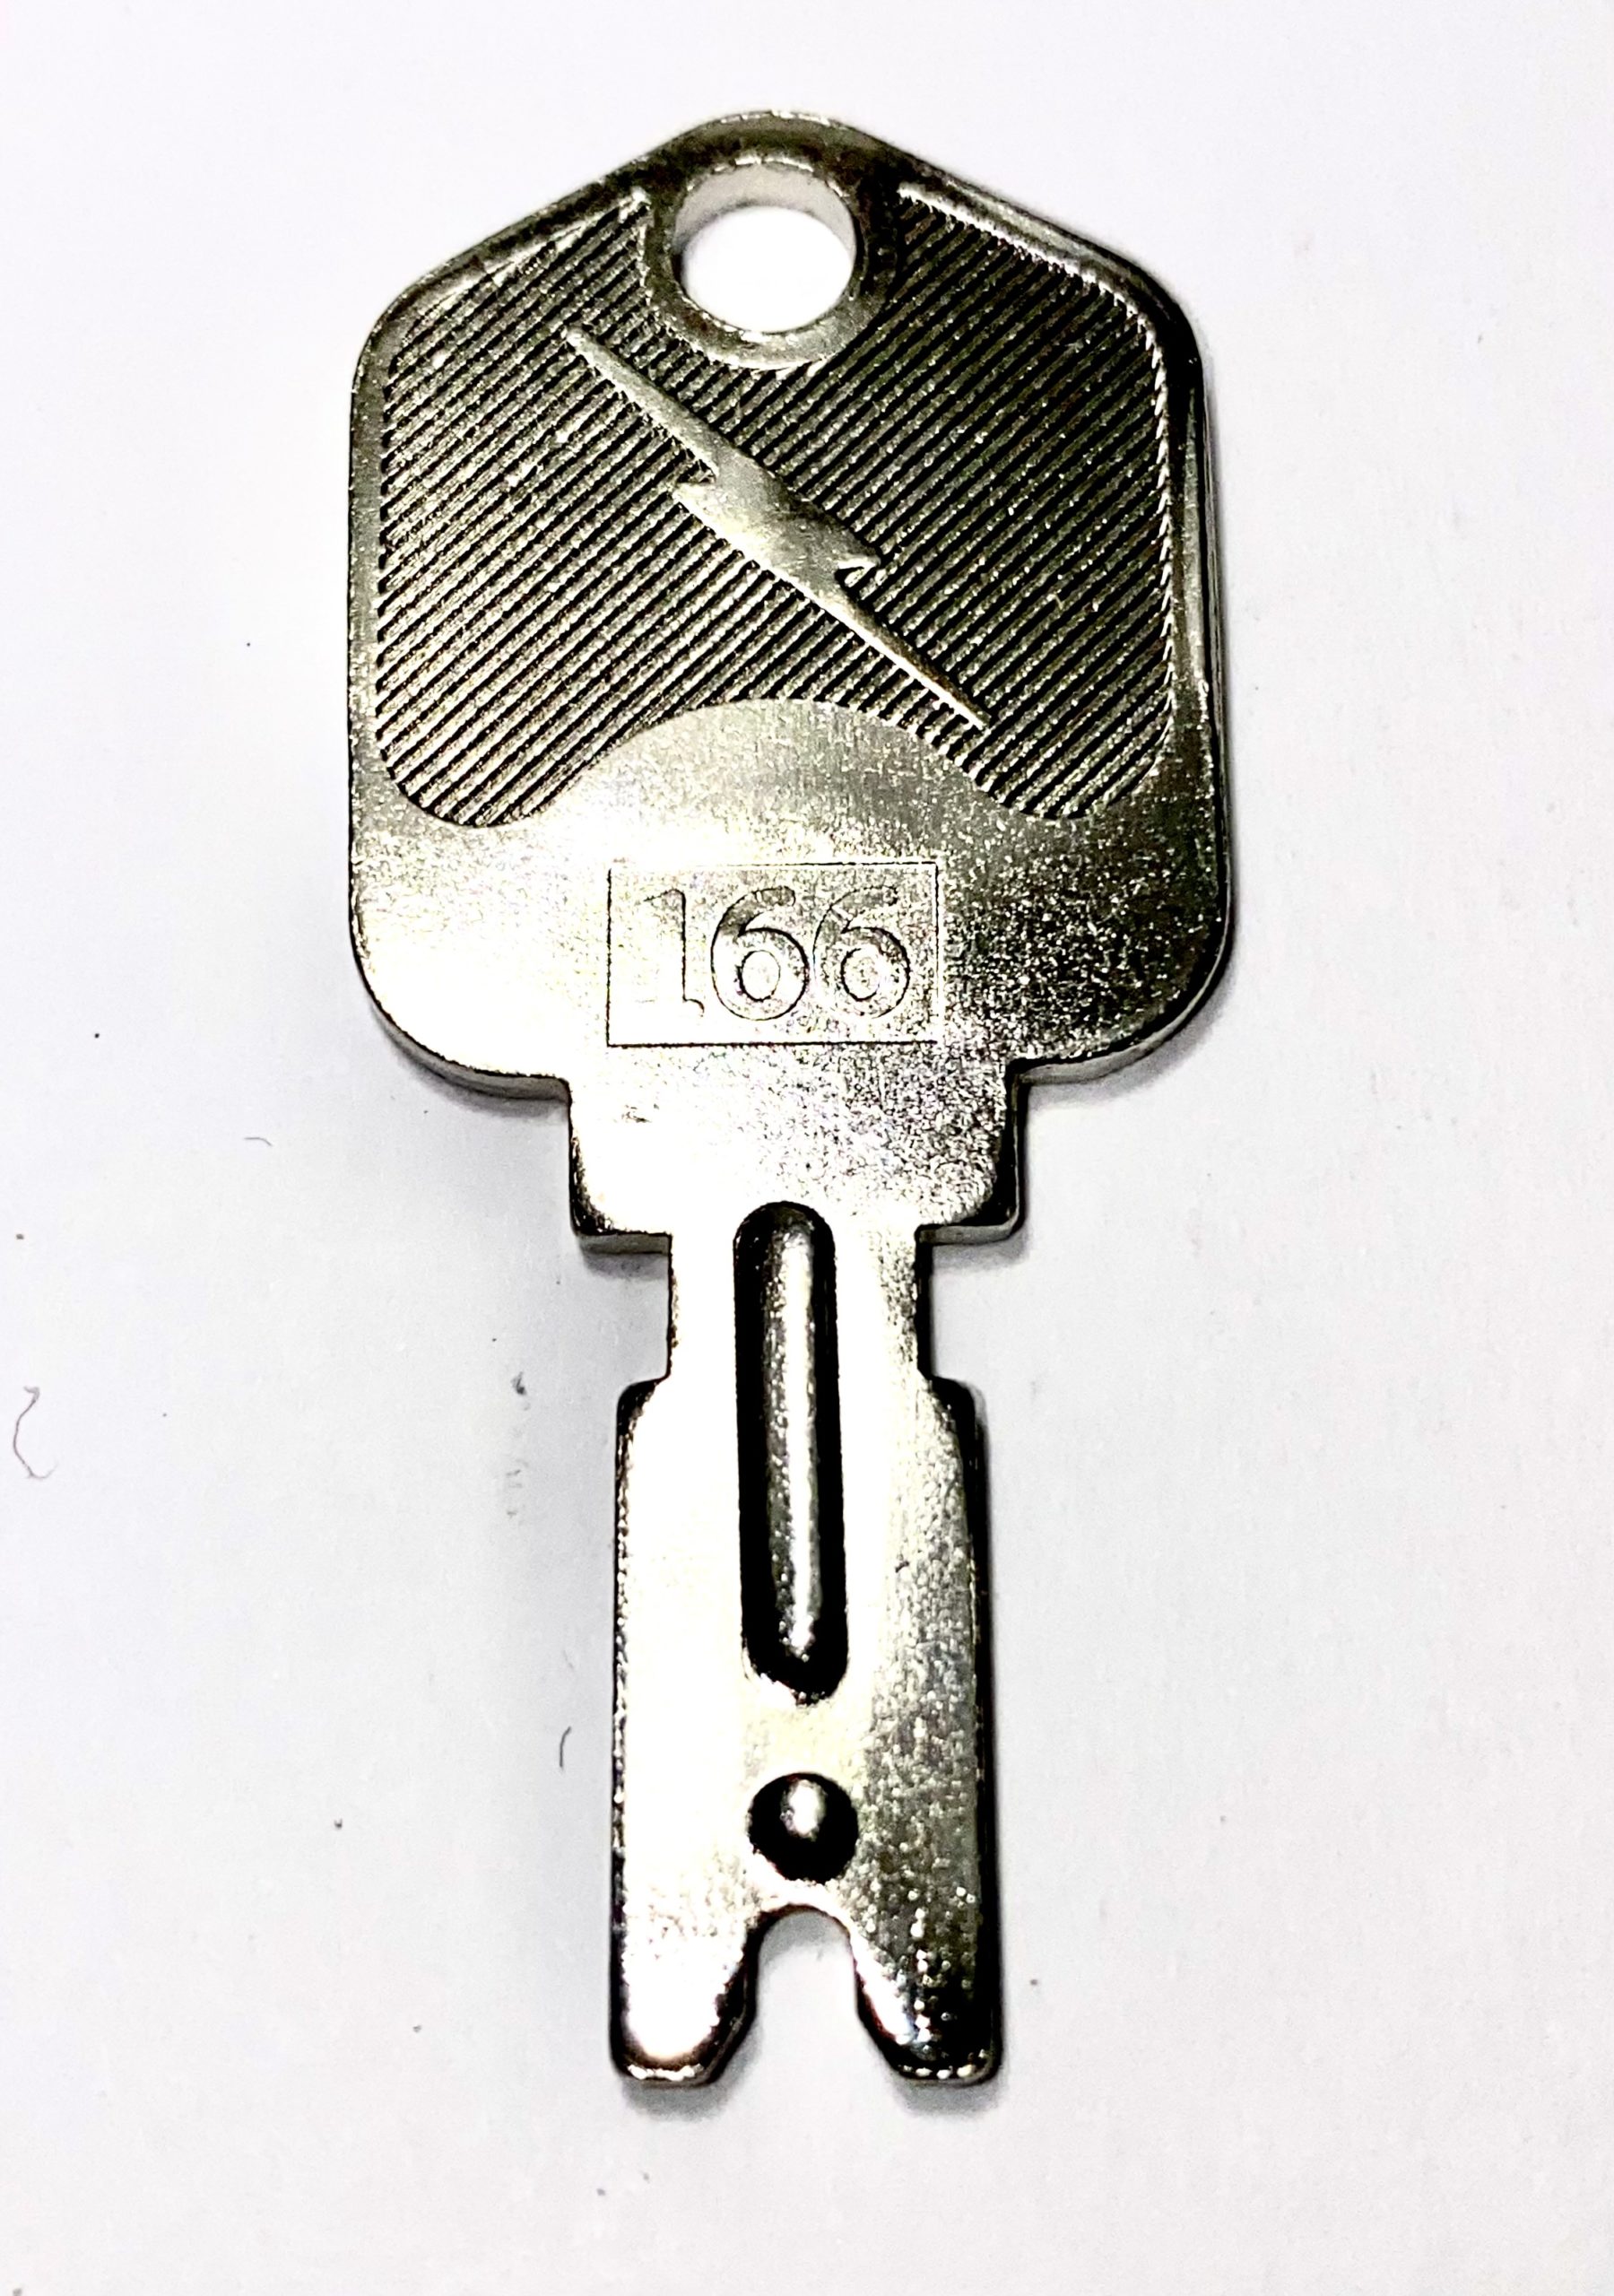 10 Ilco part number 1430 Clark Yale Daewoo Hyster Gradall JLG Forklift Key 